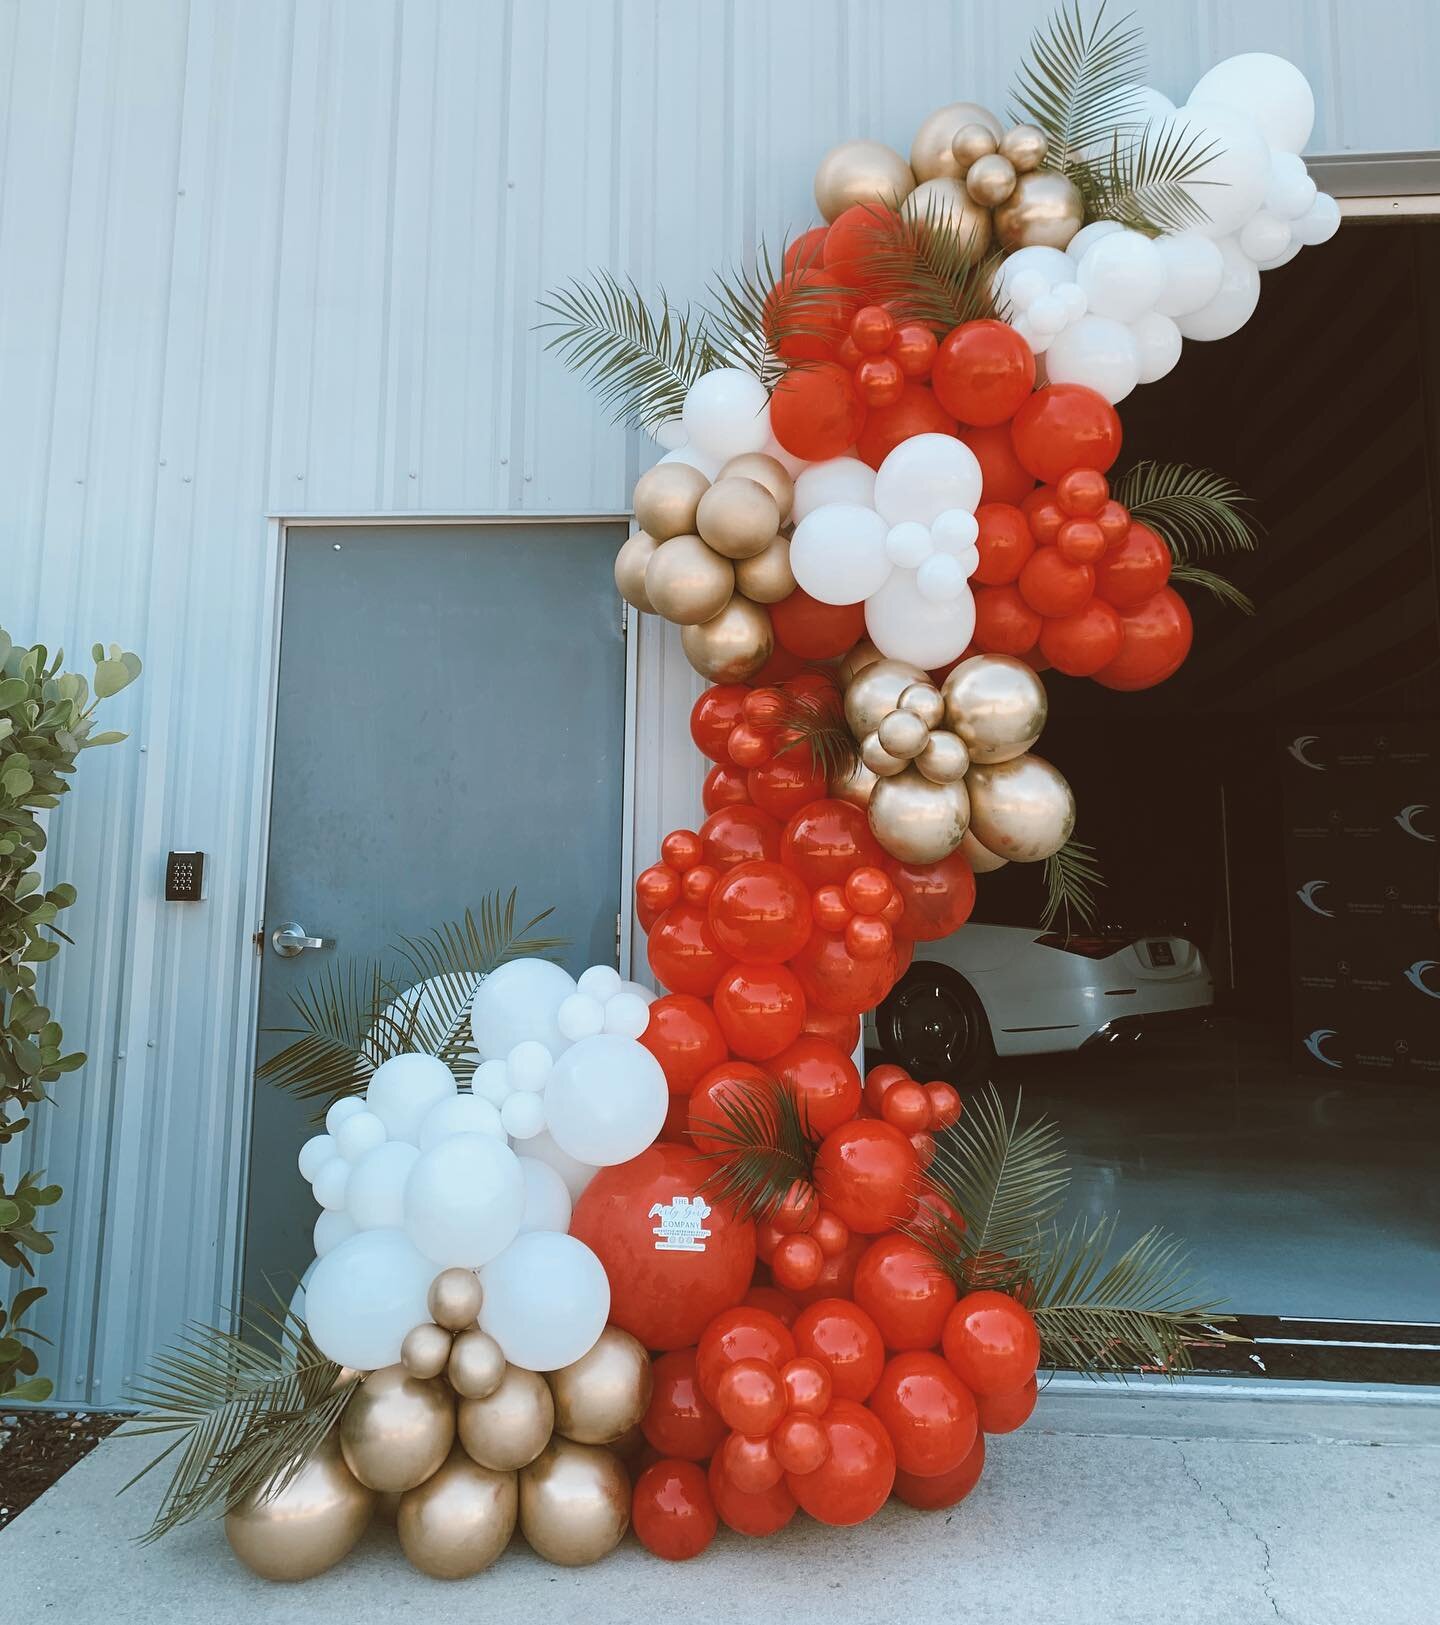 Until further notice&hellip; 
Celebrate everything 🎈 

The Party Girl Co. had the honor of installing our luxury modern Balloonery for @path2freedominc Red Gala ✨ check out all the good work they do to bring hope and healing due to human trafficking